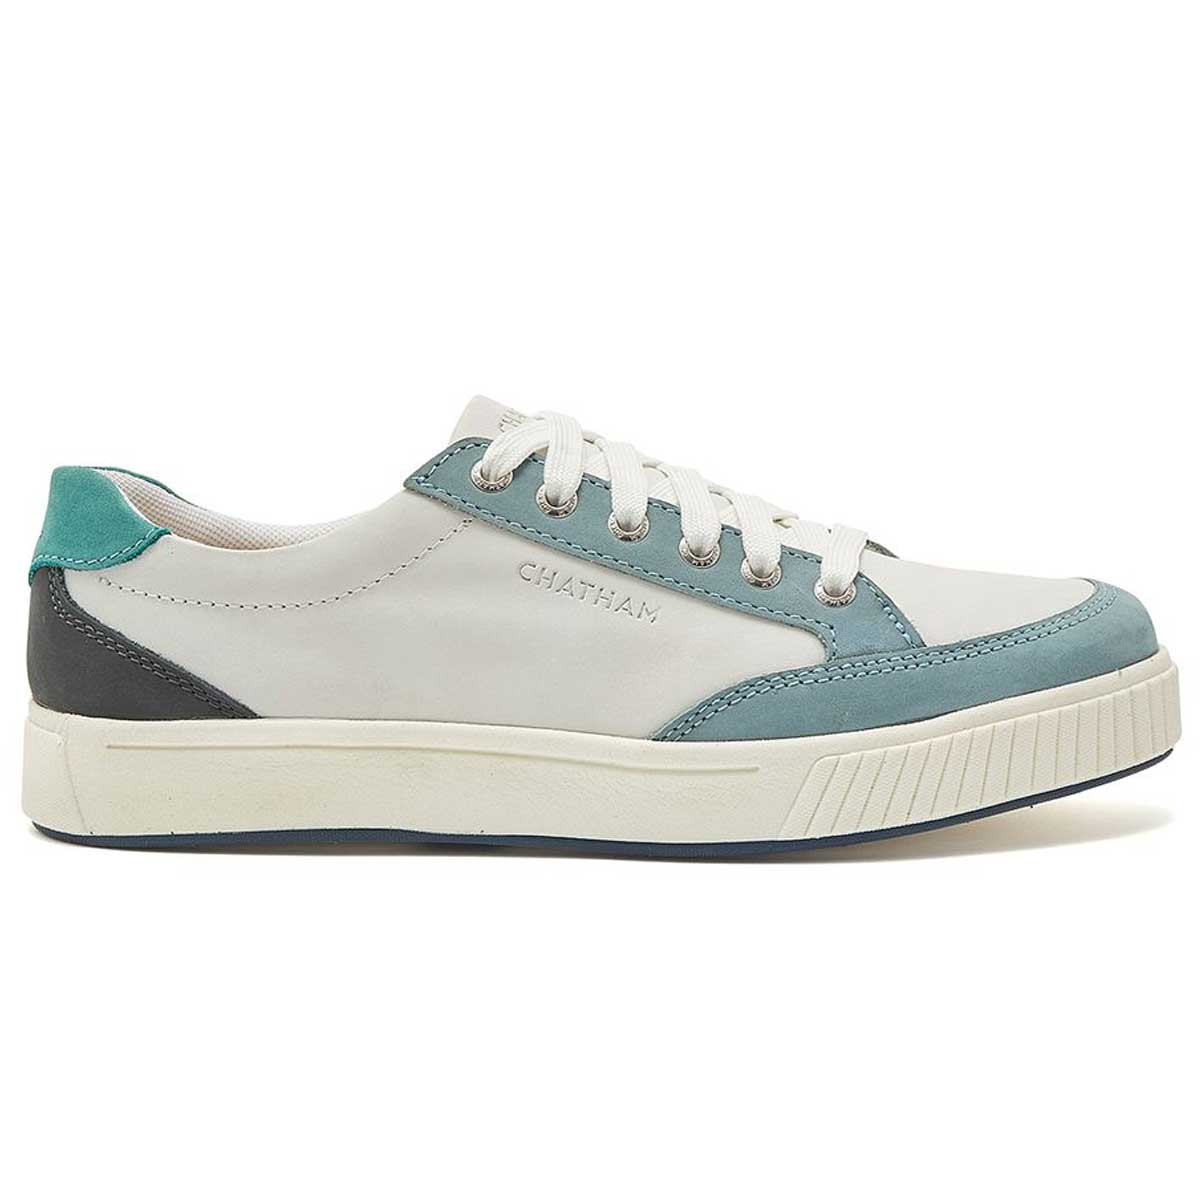 CHATHAM Fingle G2 Premium Leather Court-Style Trainers - Women's - White / Blue